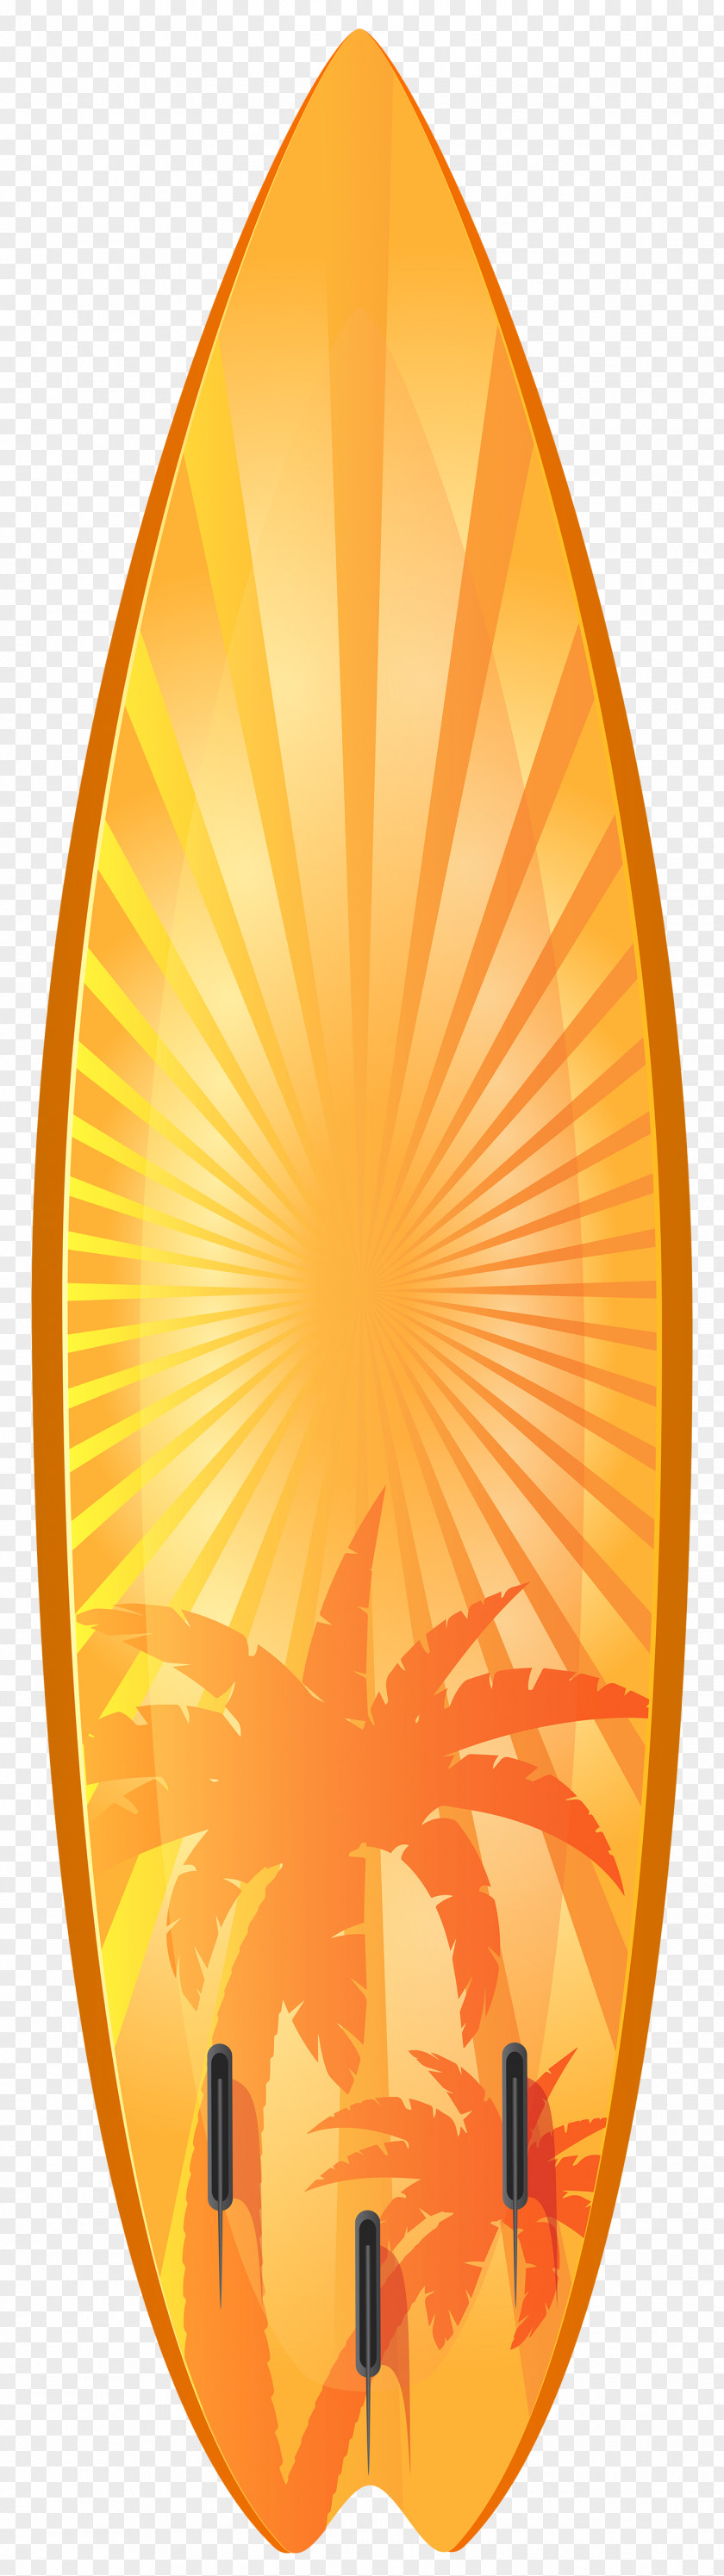 Orange Surfboard With Palm Trees Transparent Clip Art Image Surfing PNG